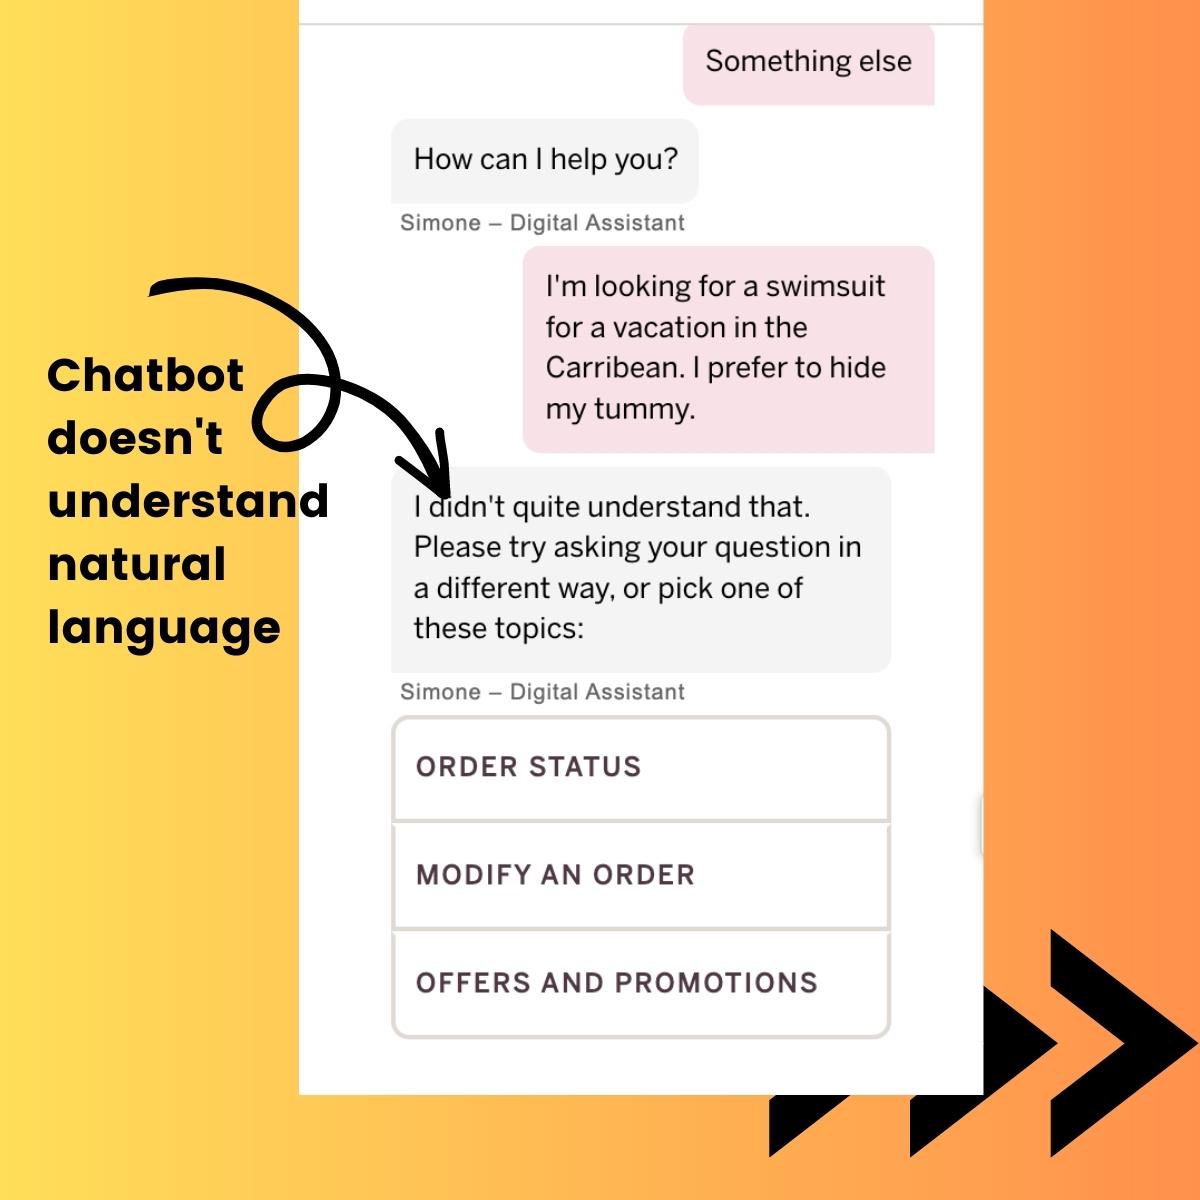 Chatbot for retail doesn't understand natural nanguage